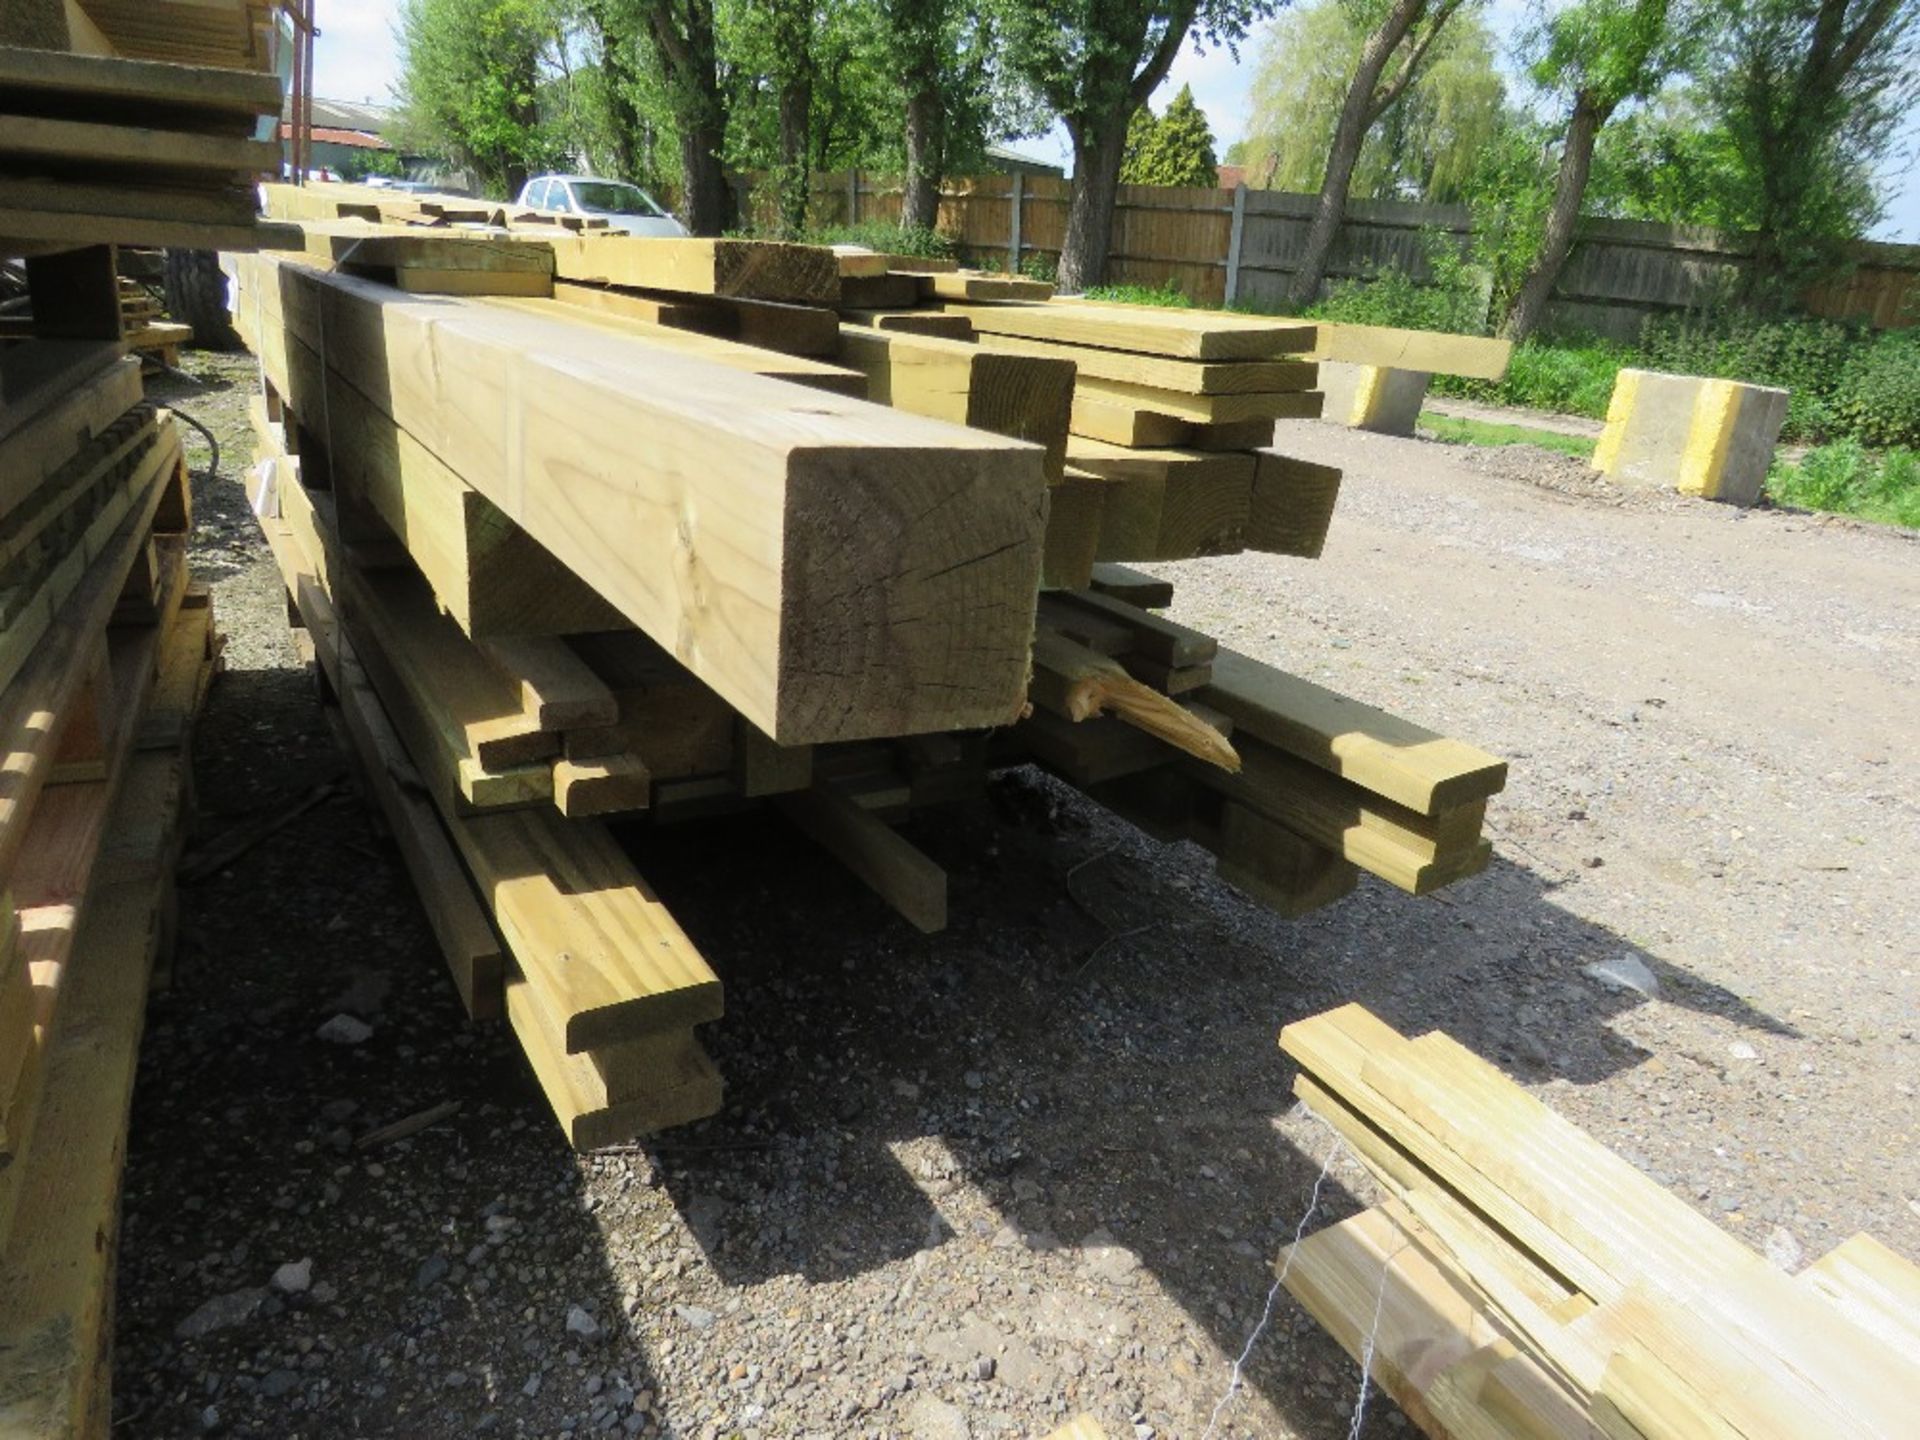 2 X BUNDLES OF TREATED FENCING TIMBERS, POSTS AND BOARDS AS SHOWN, 7-10FT LENGTH APPROX. - Image 4 of 5